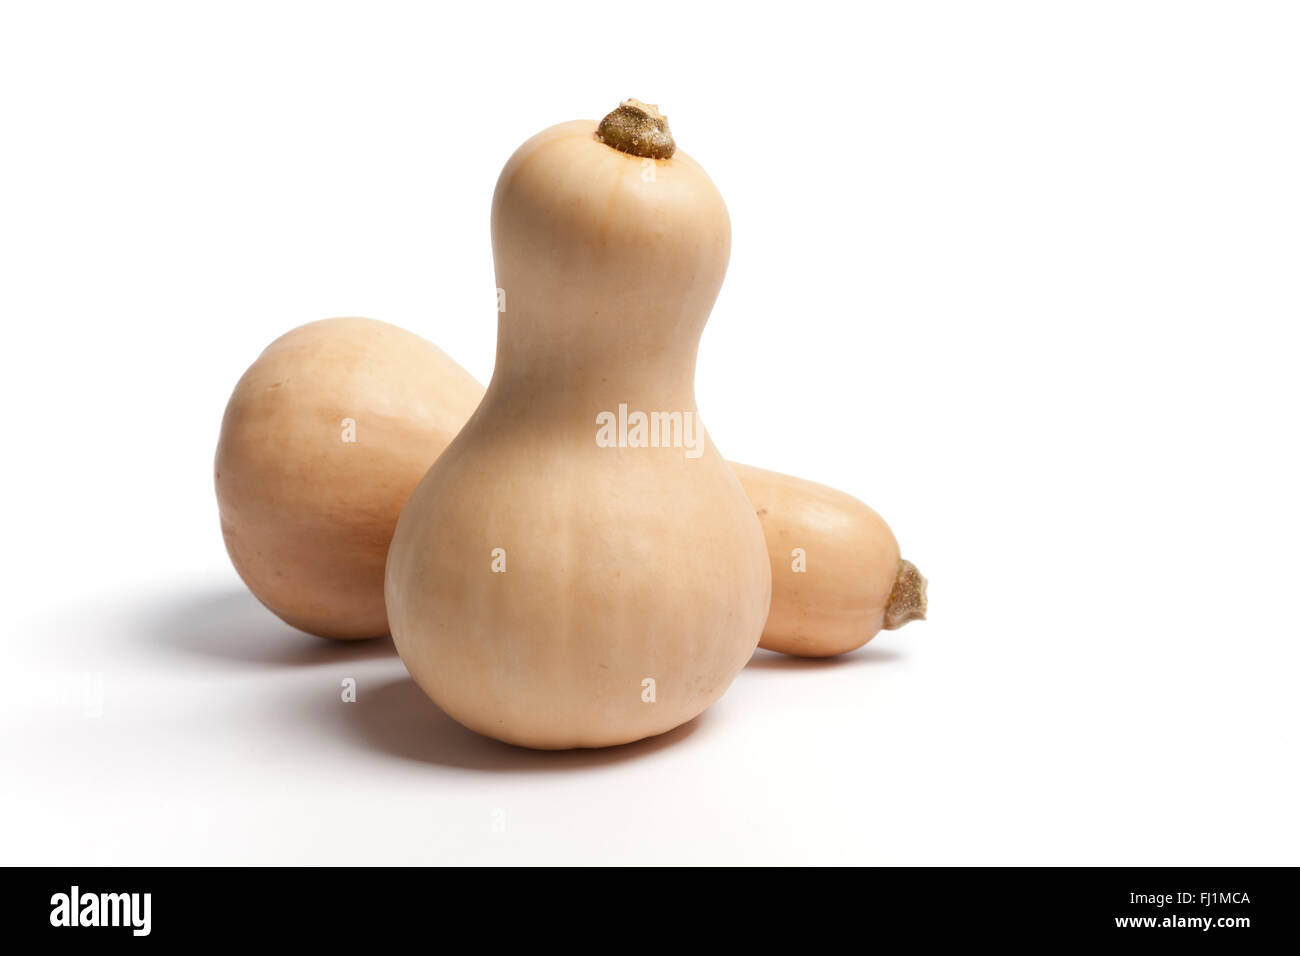 Two fresh whole butternut pumpkins on white background Stock Photo